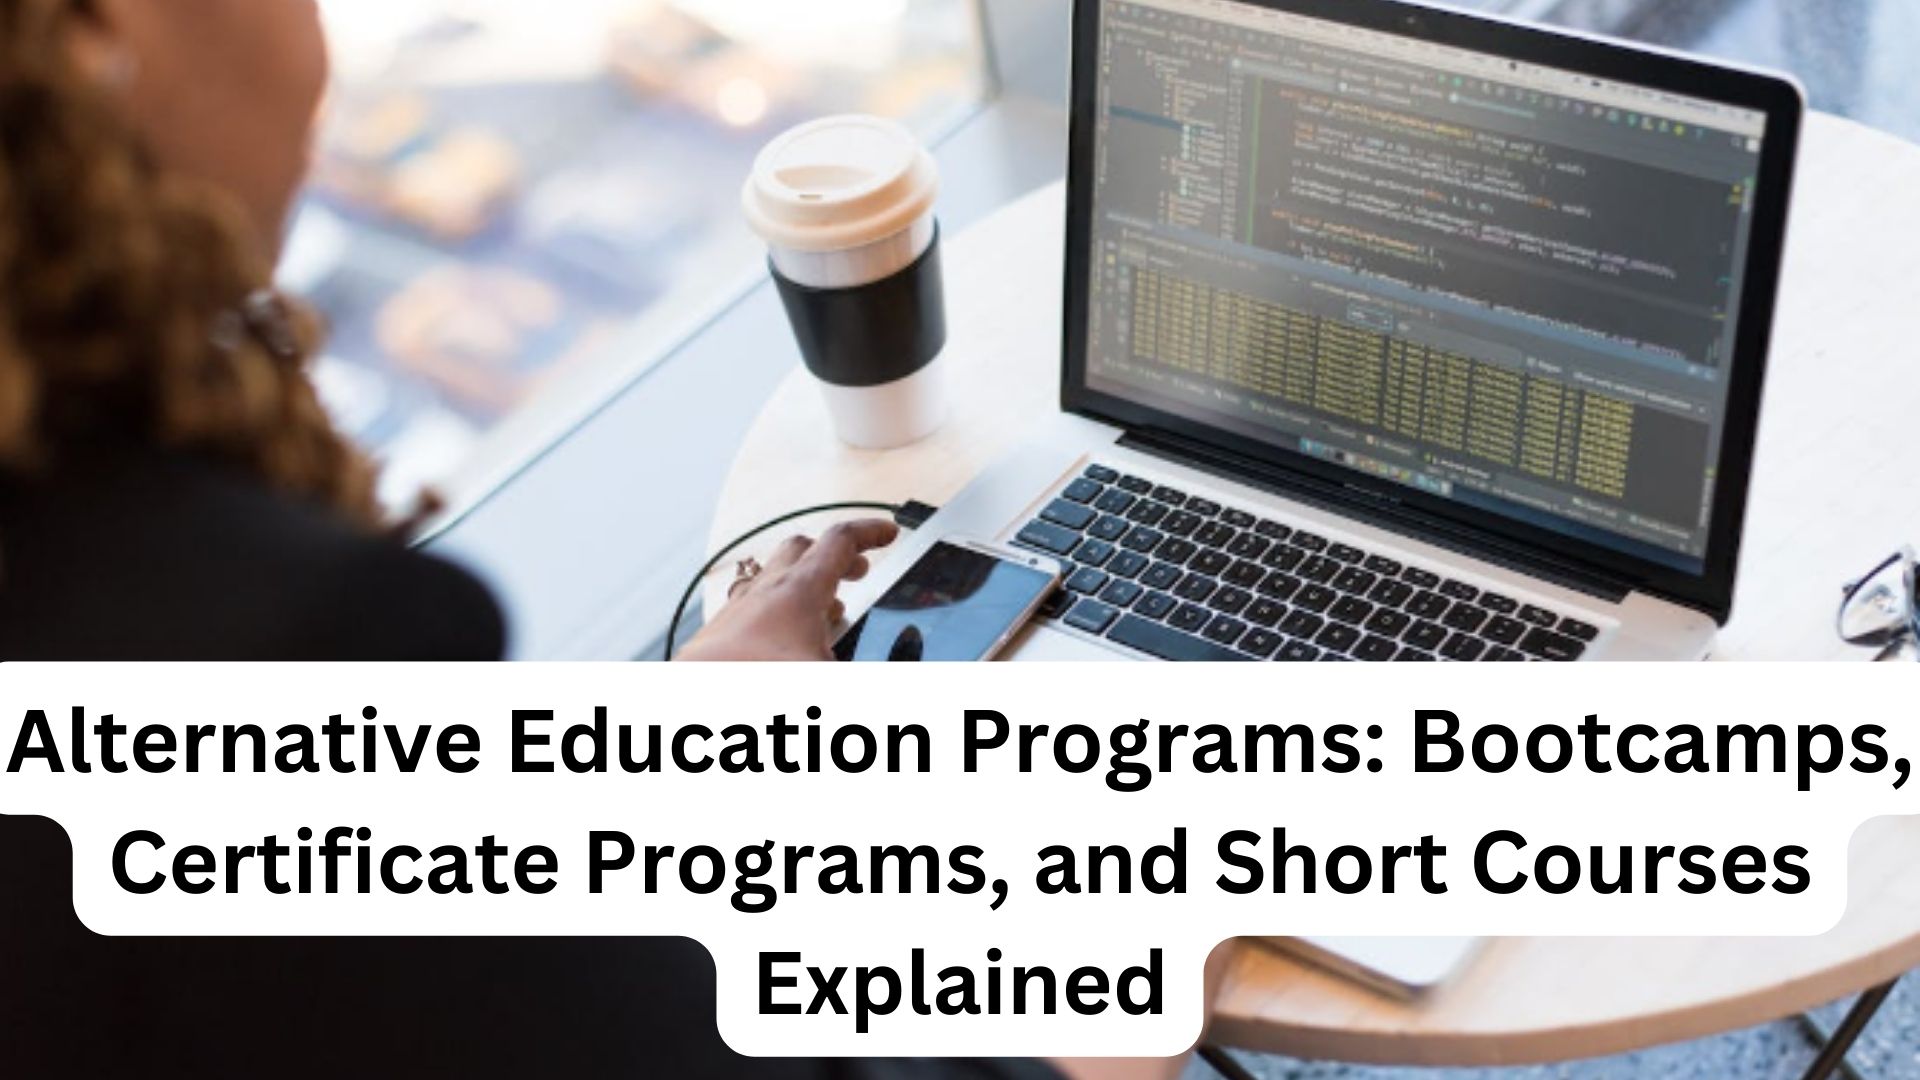 Alternative Education Programs: Bootcamps, Certificate Programs, and Short Courses Explained